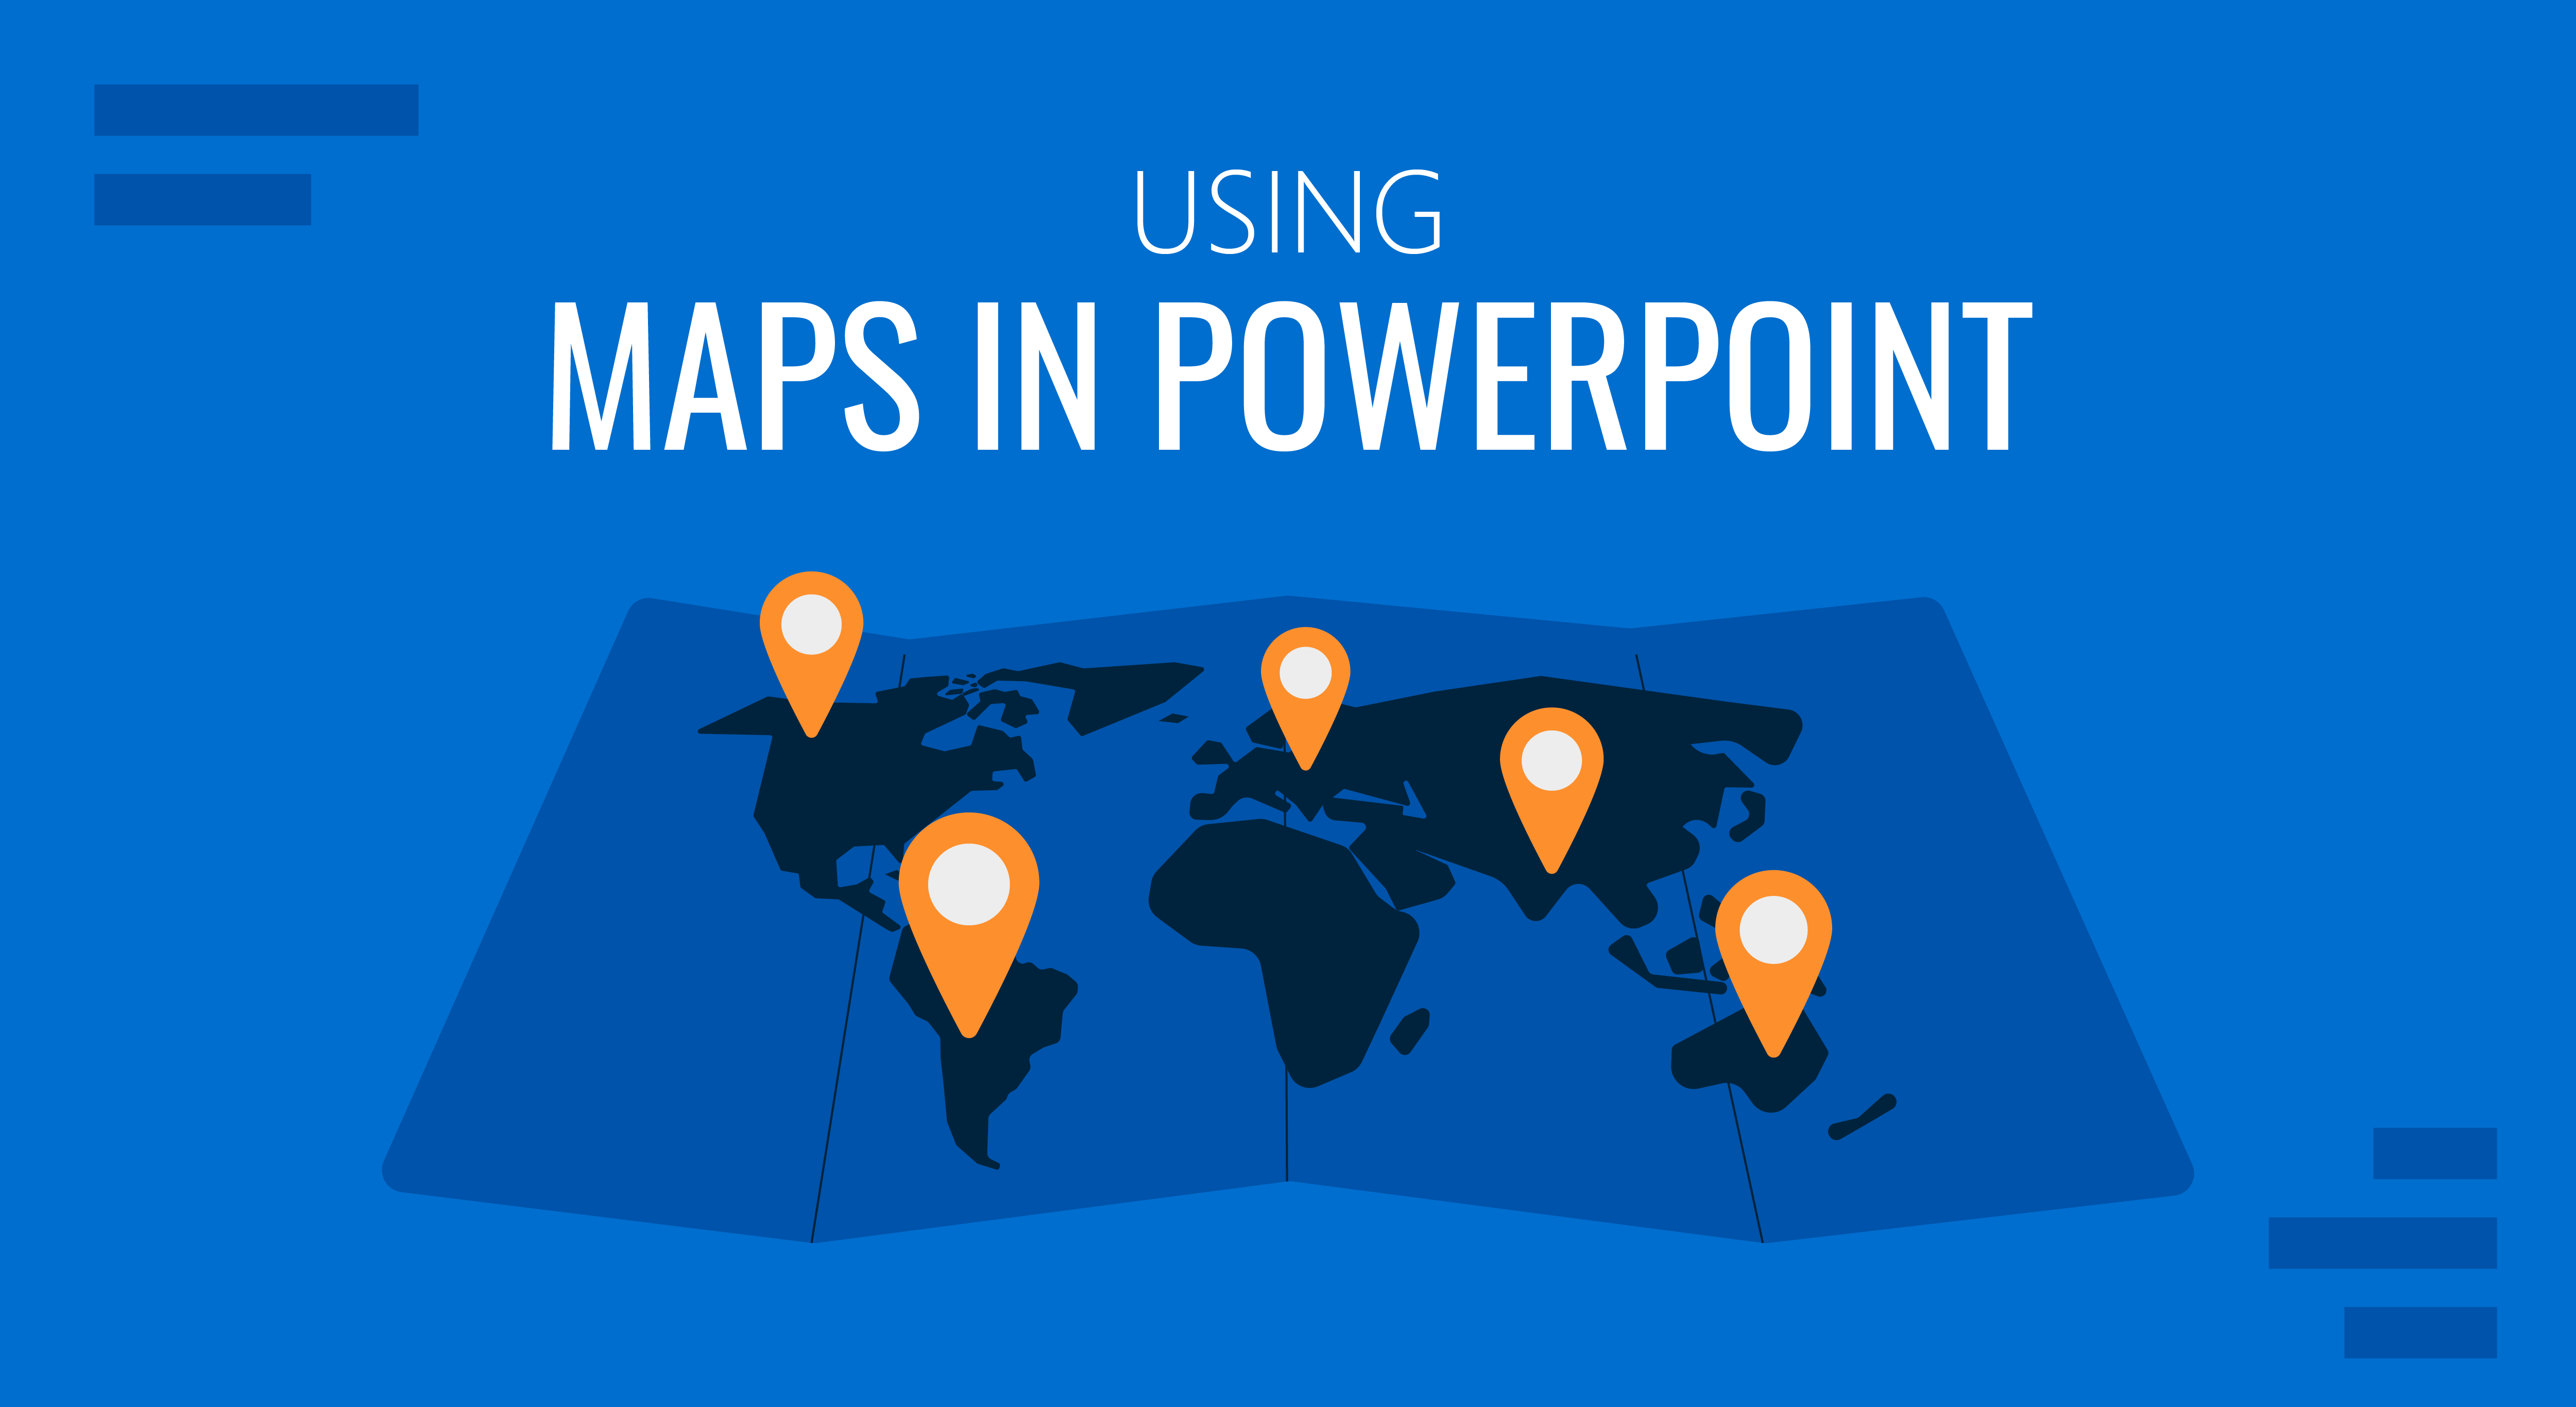 Using Maps in PowerPoint Presentations